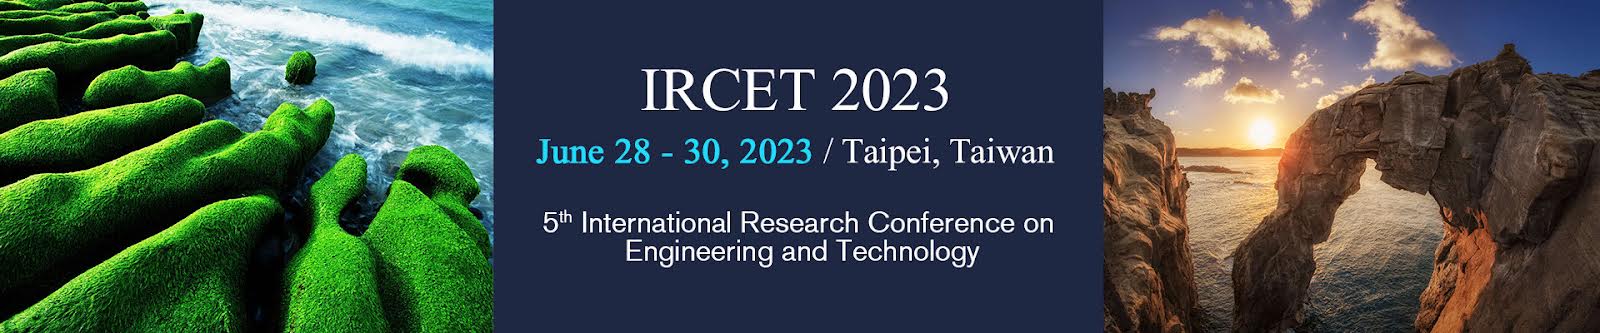 International Research Conference on Engineering and Technology, Taipei, Taiwan